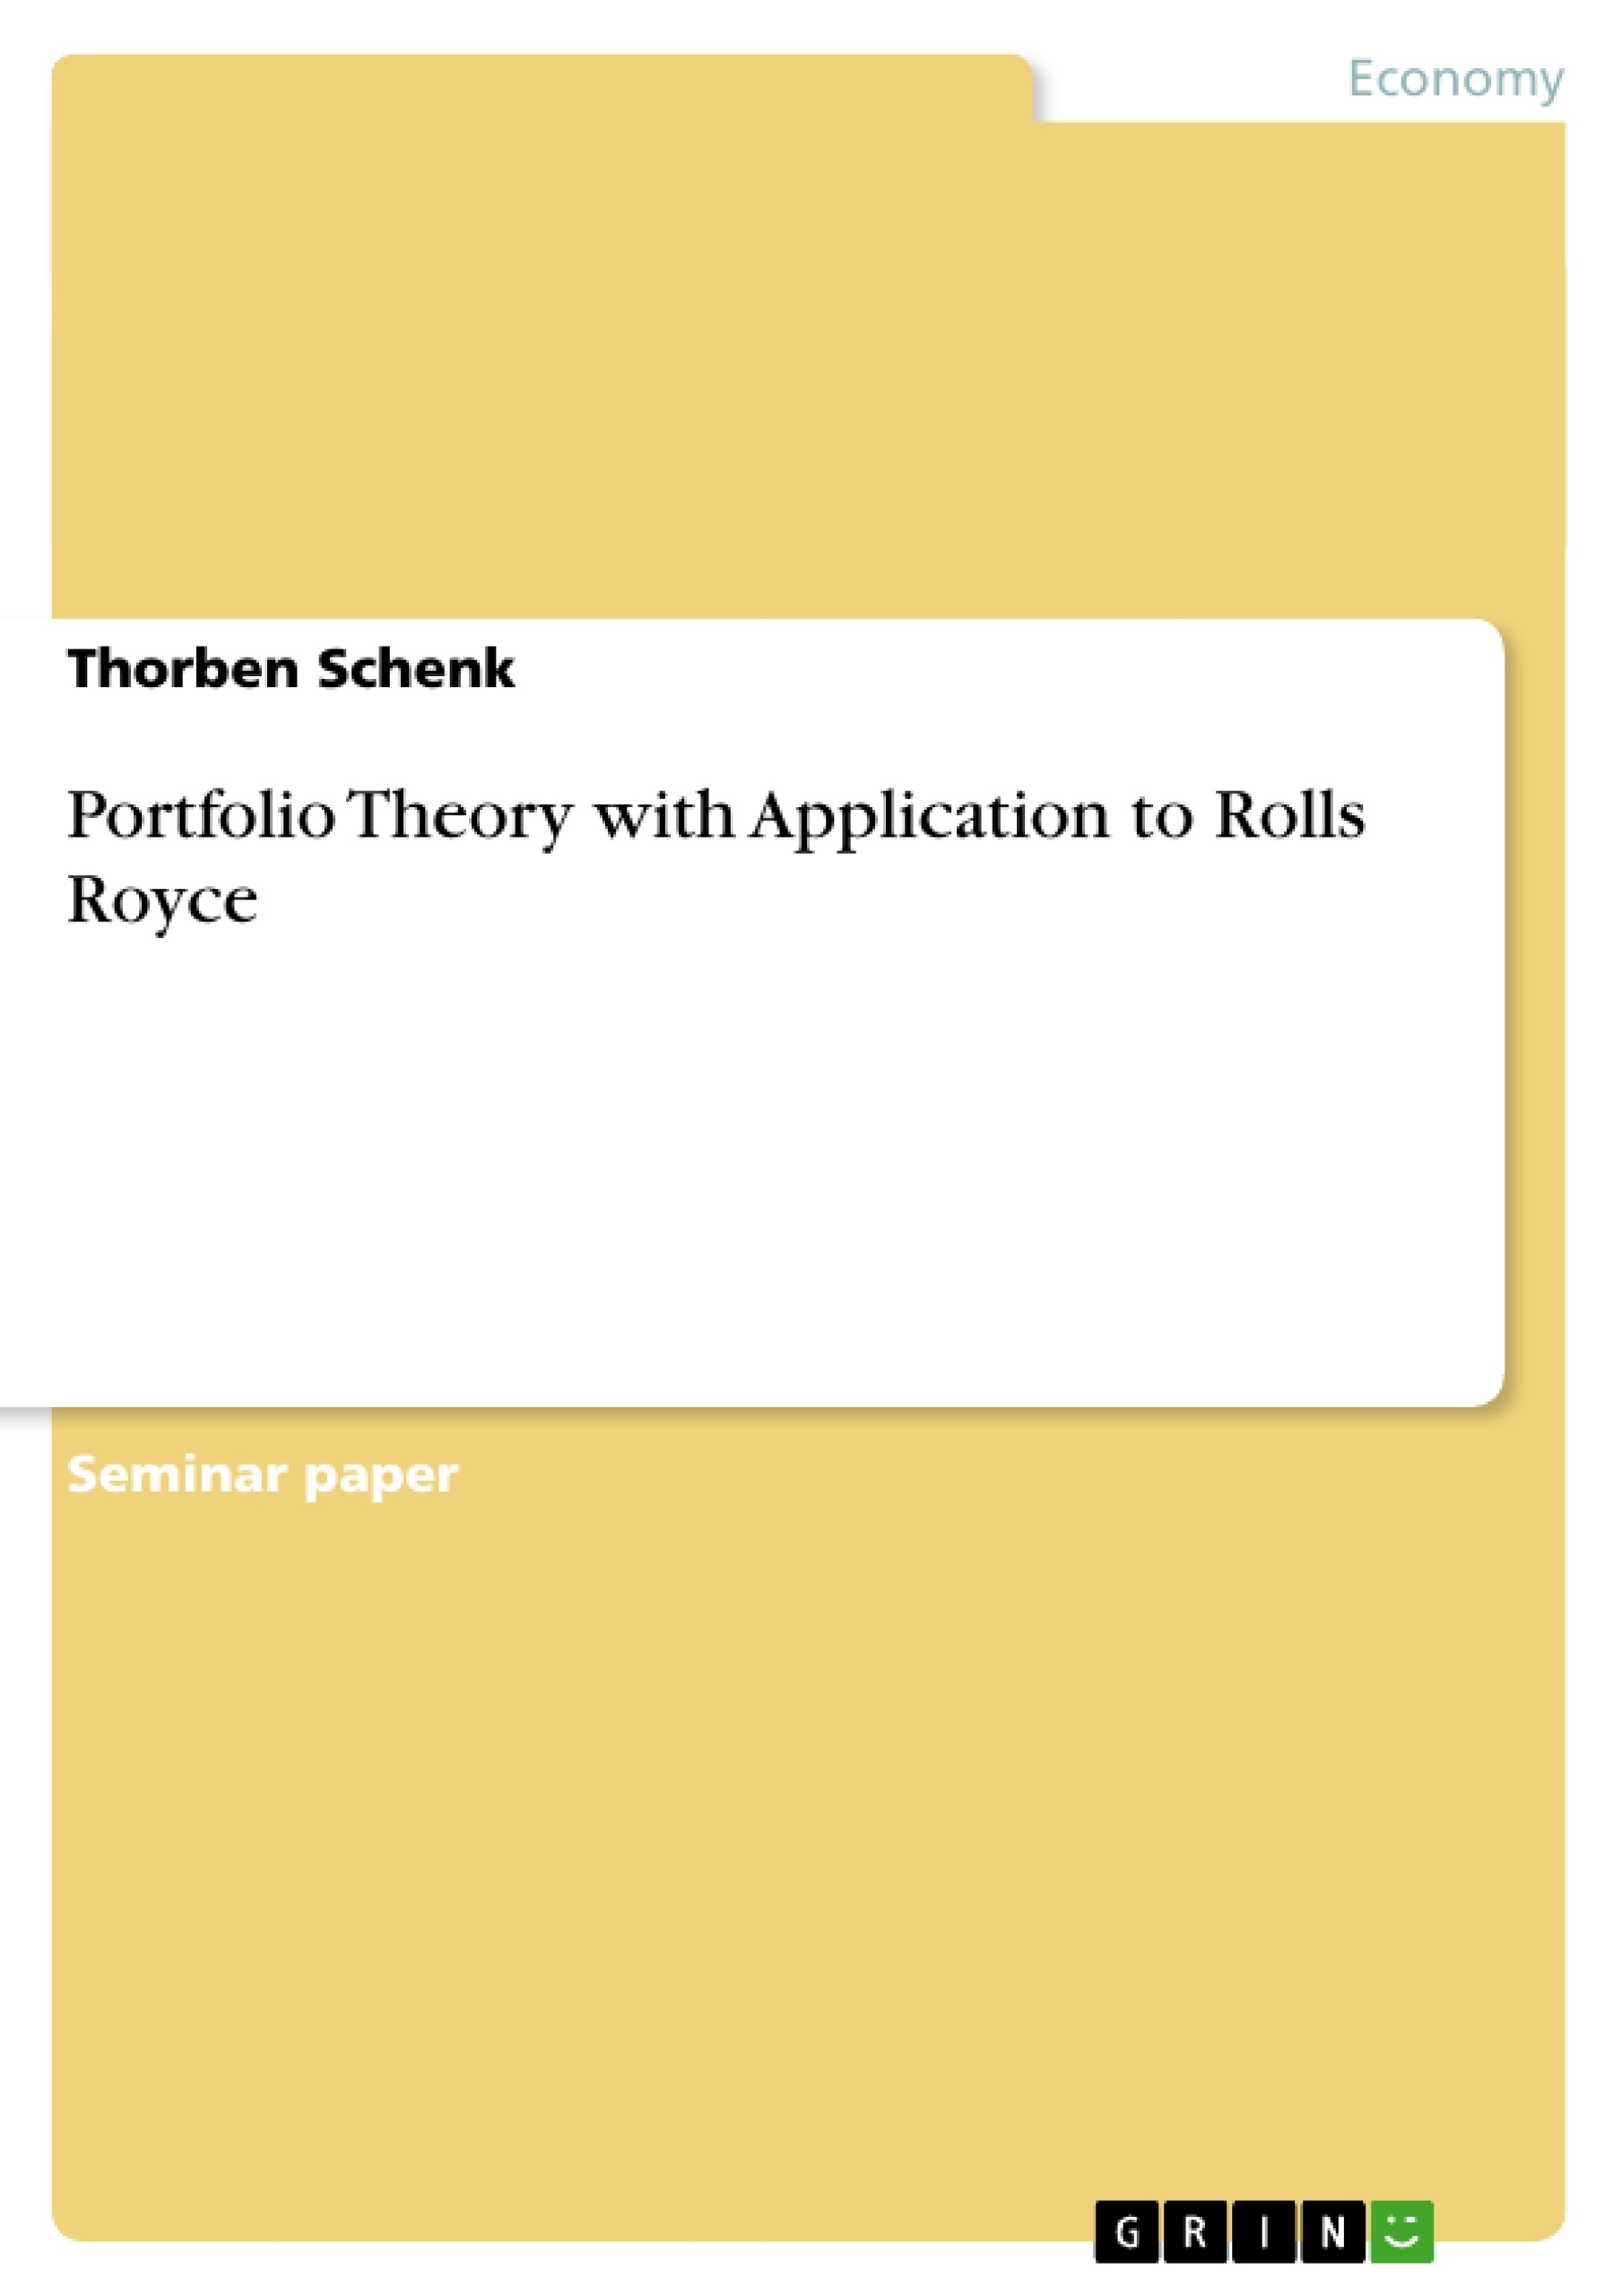 Title: Portfolio Theory with Application to Rolls Royce